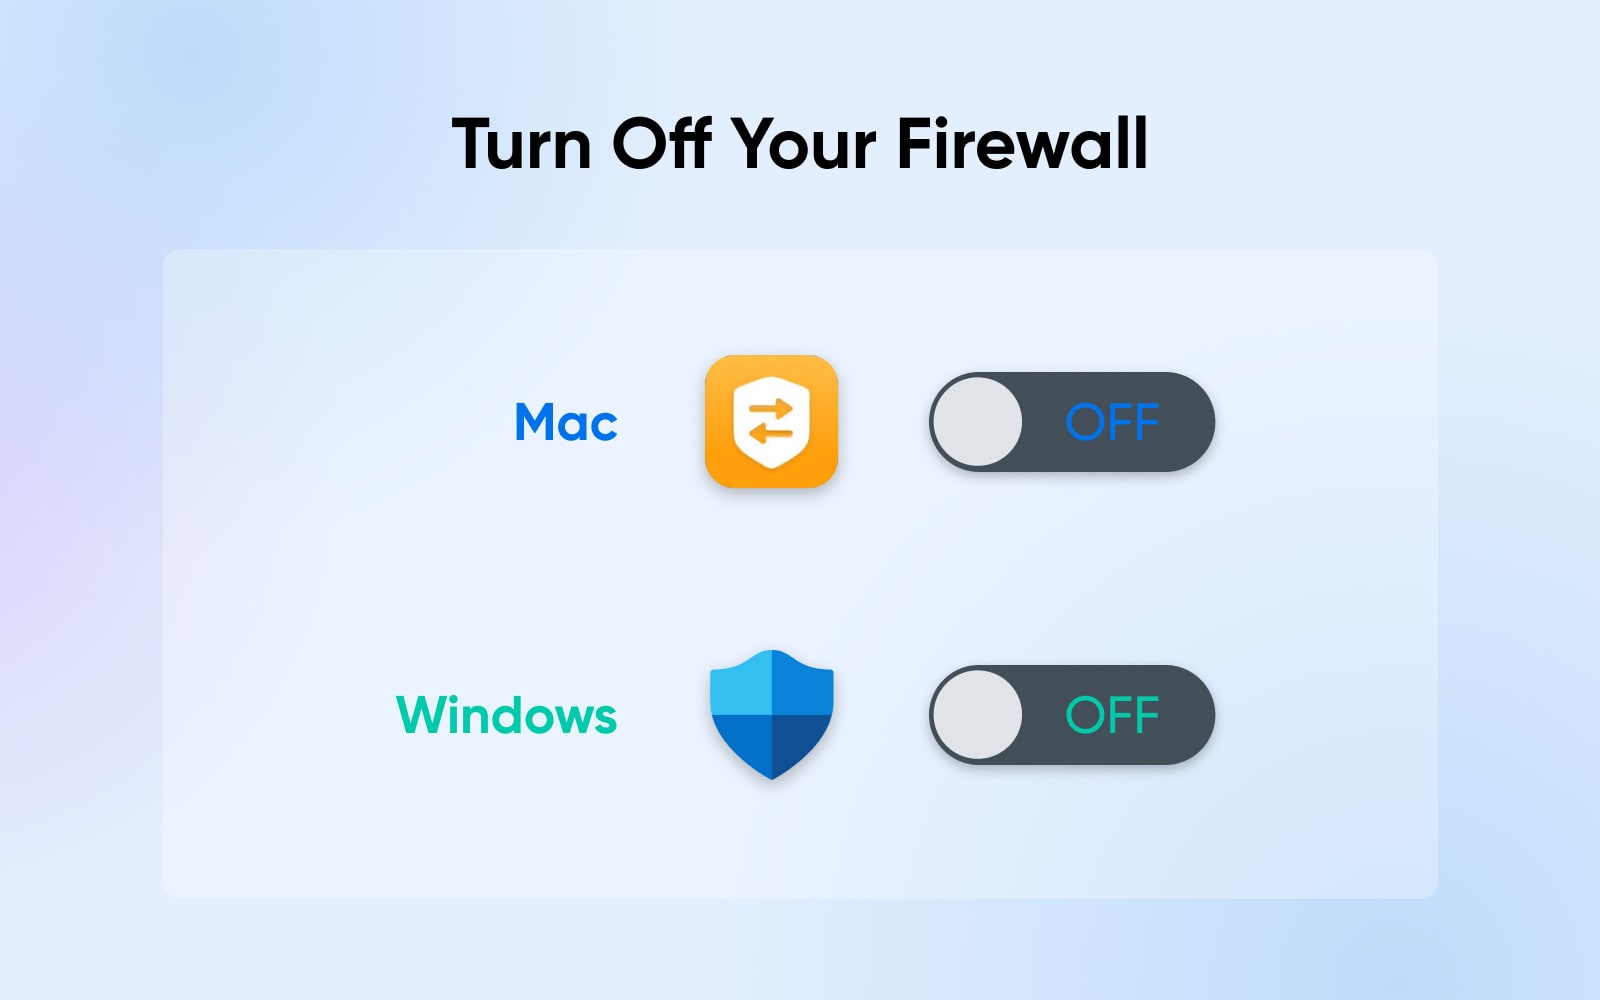 Mac and Windows firewall symbols with a sliding button turned to "OFF." 